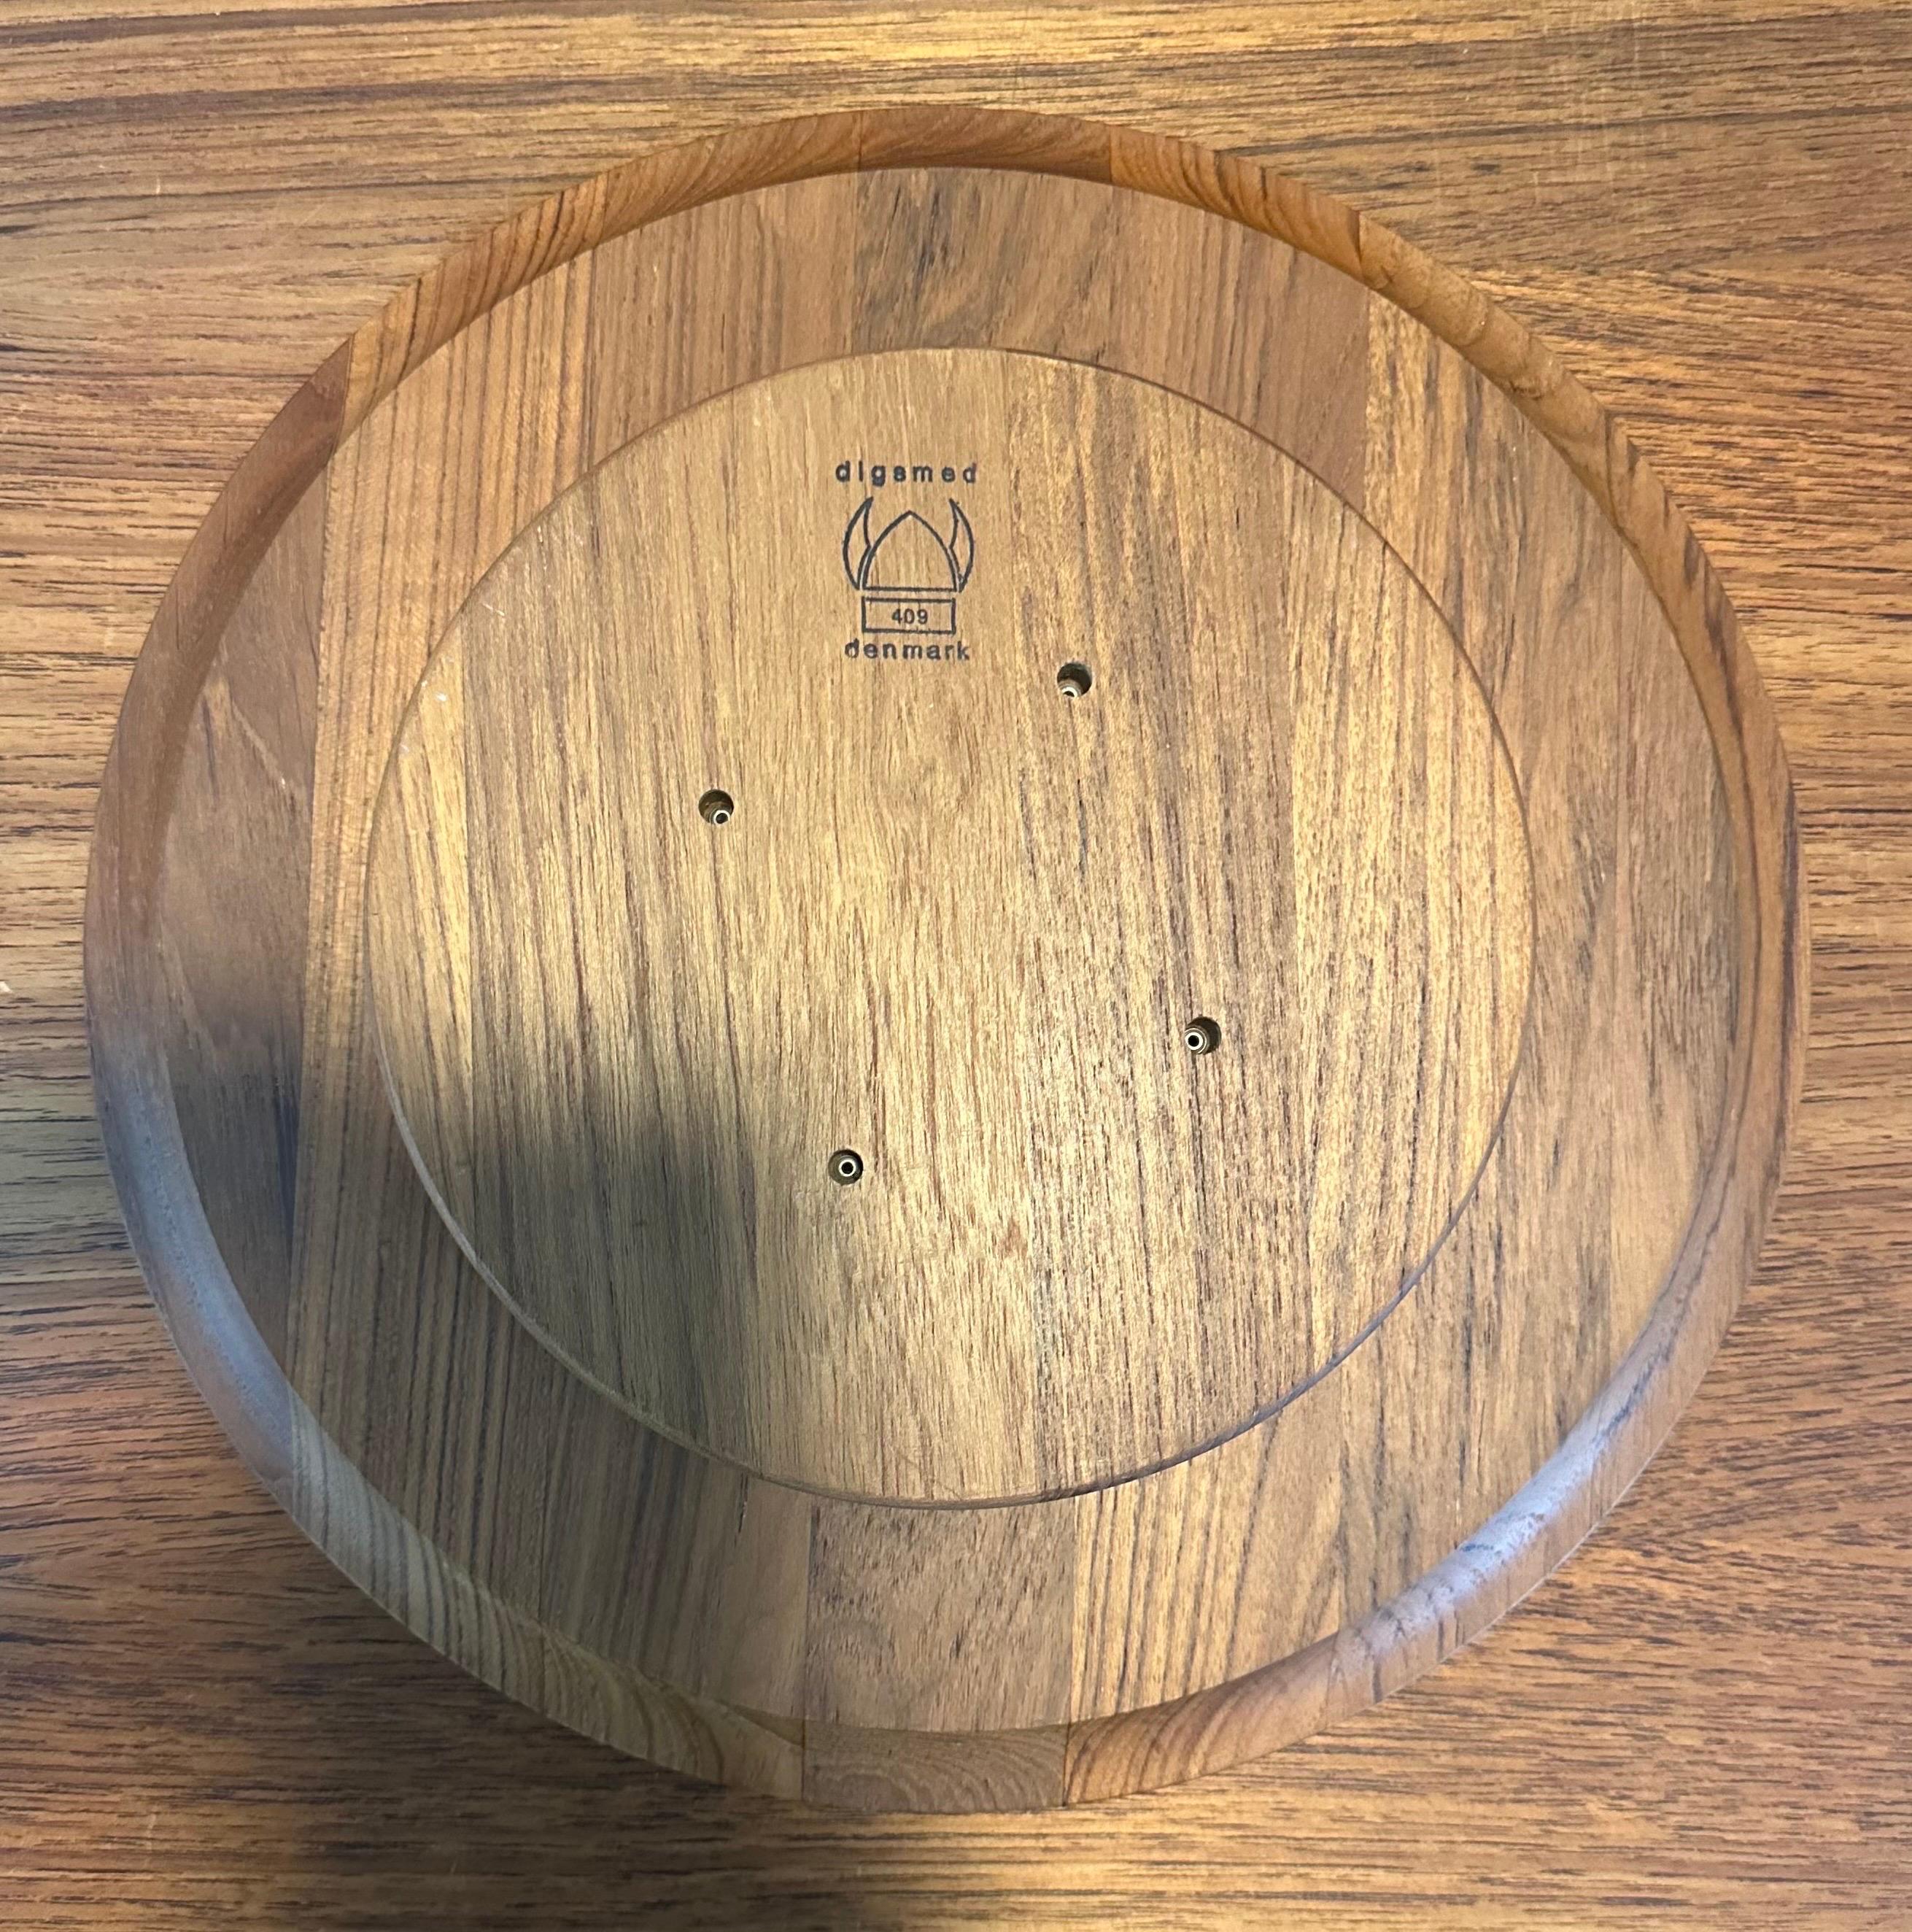 20th Century Danish Modern Teak Lazy Susan by Digsmed For Sale